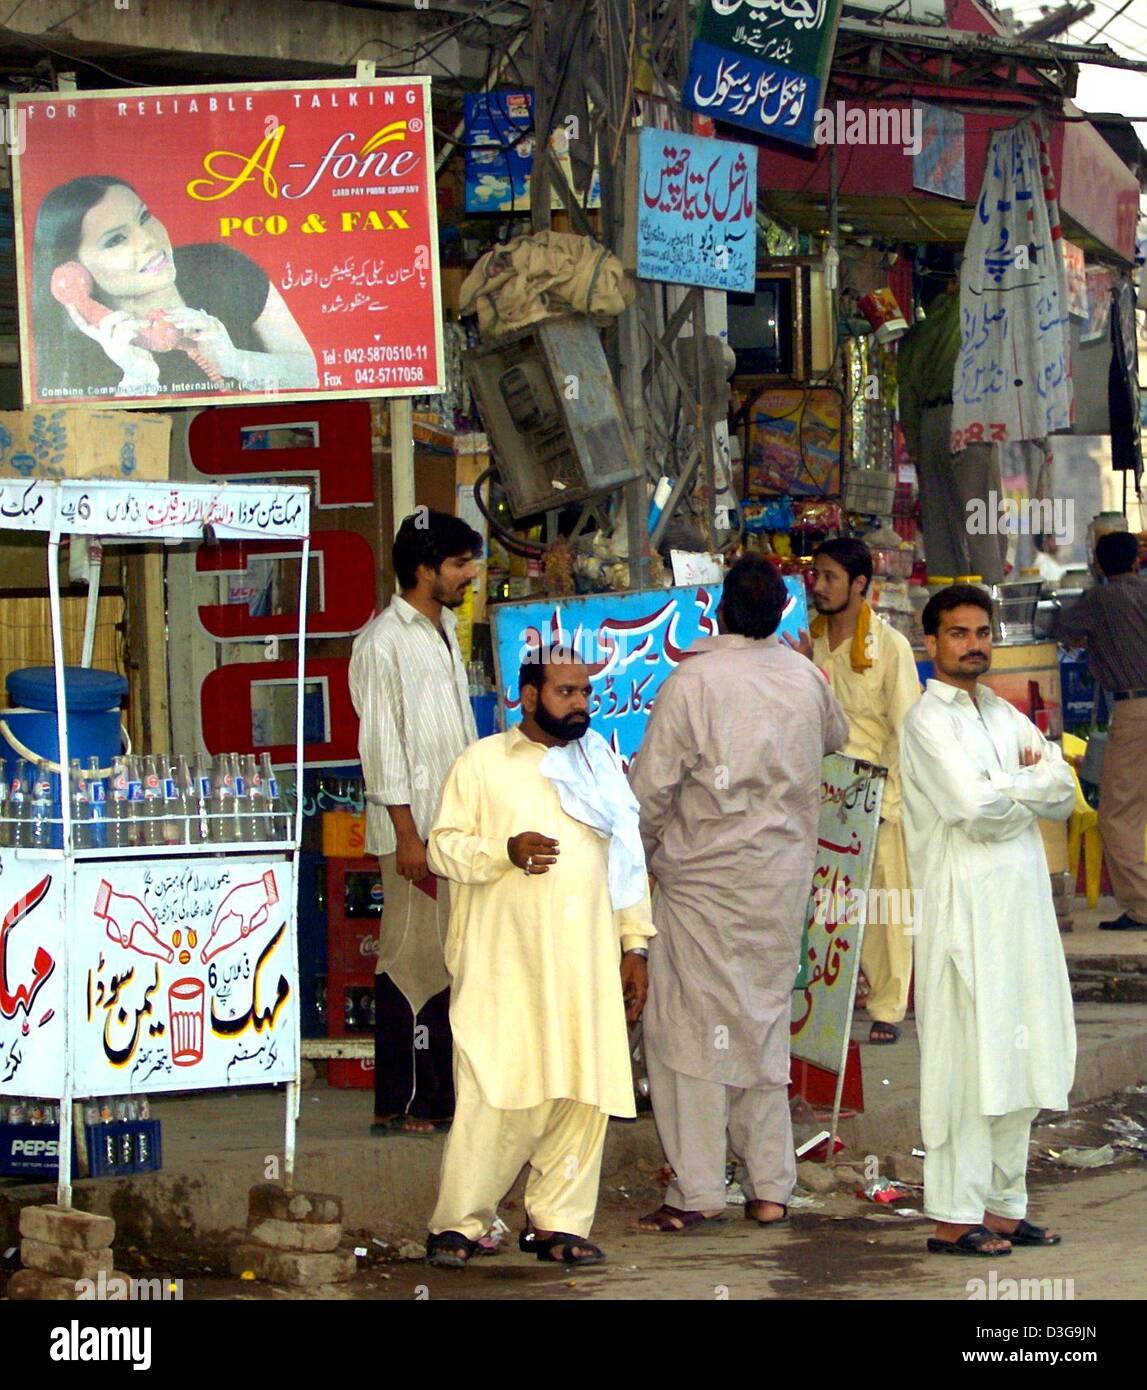 dpa-men-stand-in-front-of-a-store-in-lahore-pakistan-22-july-2004-D3G9JN.jpg